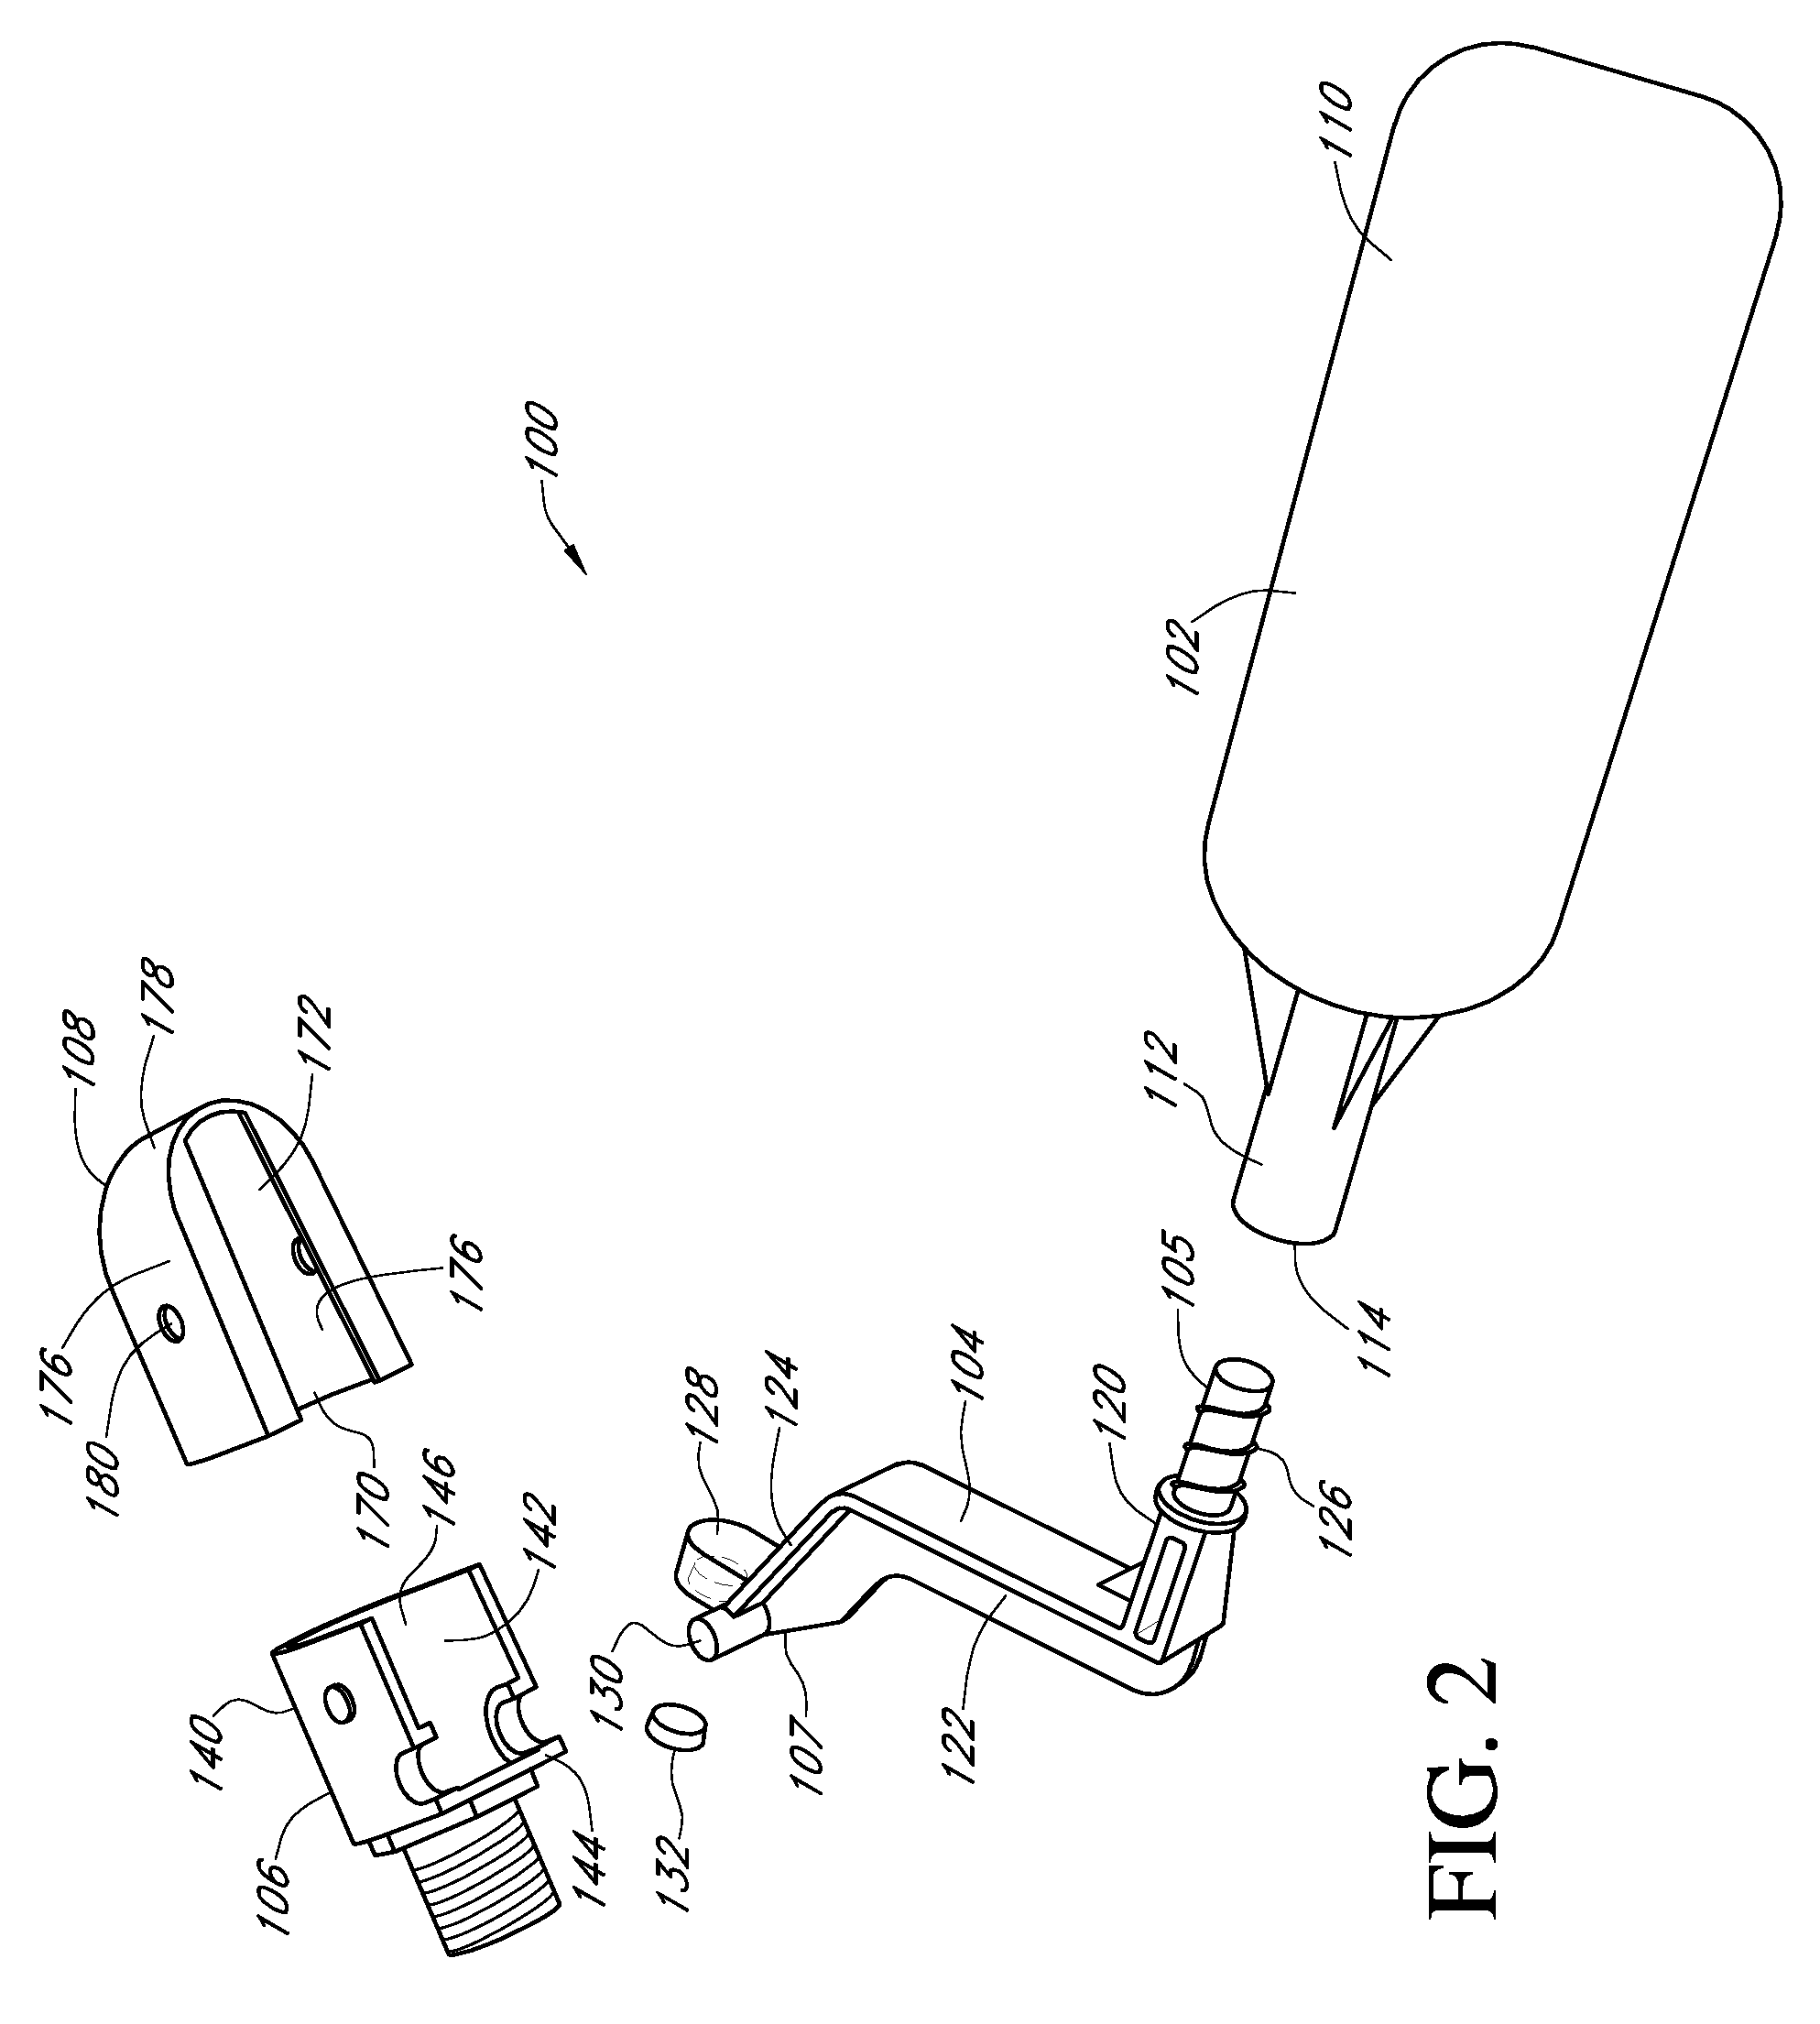 Water valve for animal waterer permitting assembly without tools